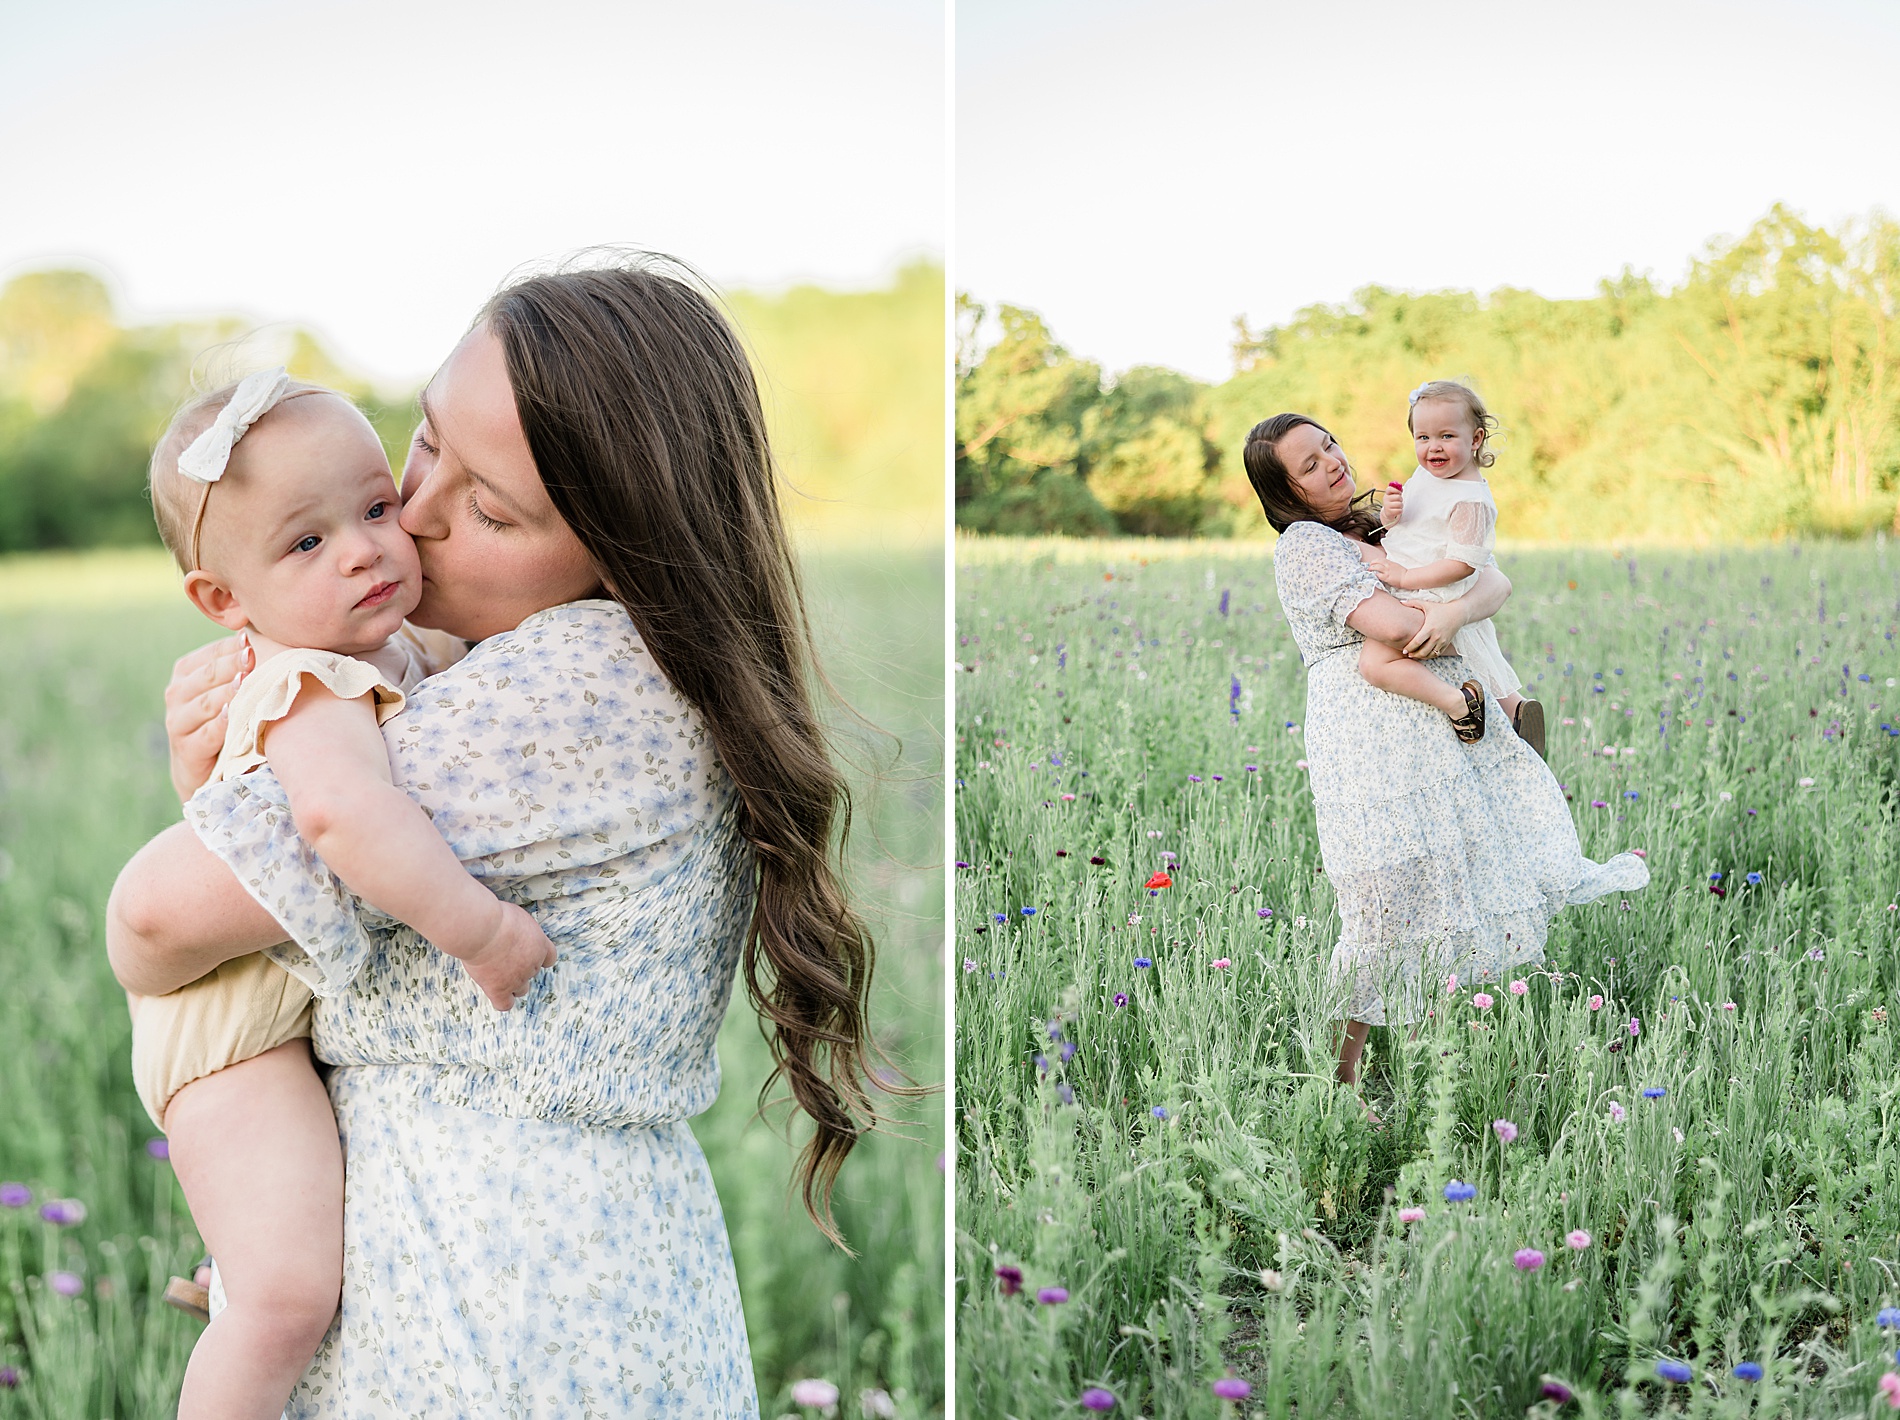 Mommy and me portaits photographed by Lindsey Dutton Photography, a Dallas family photographer